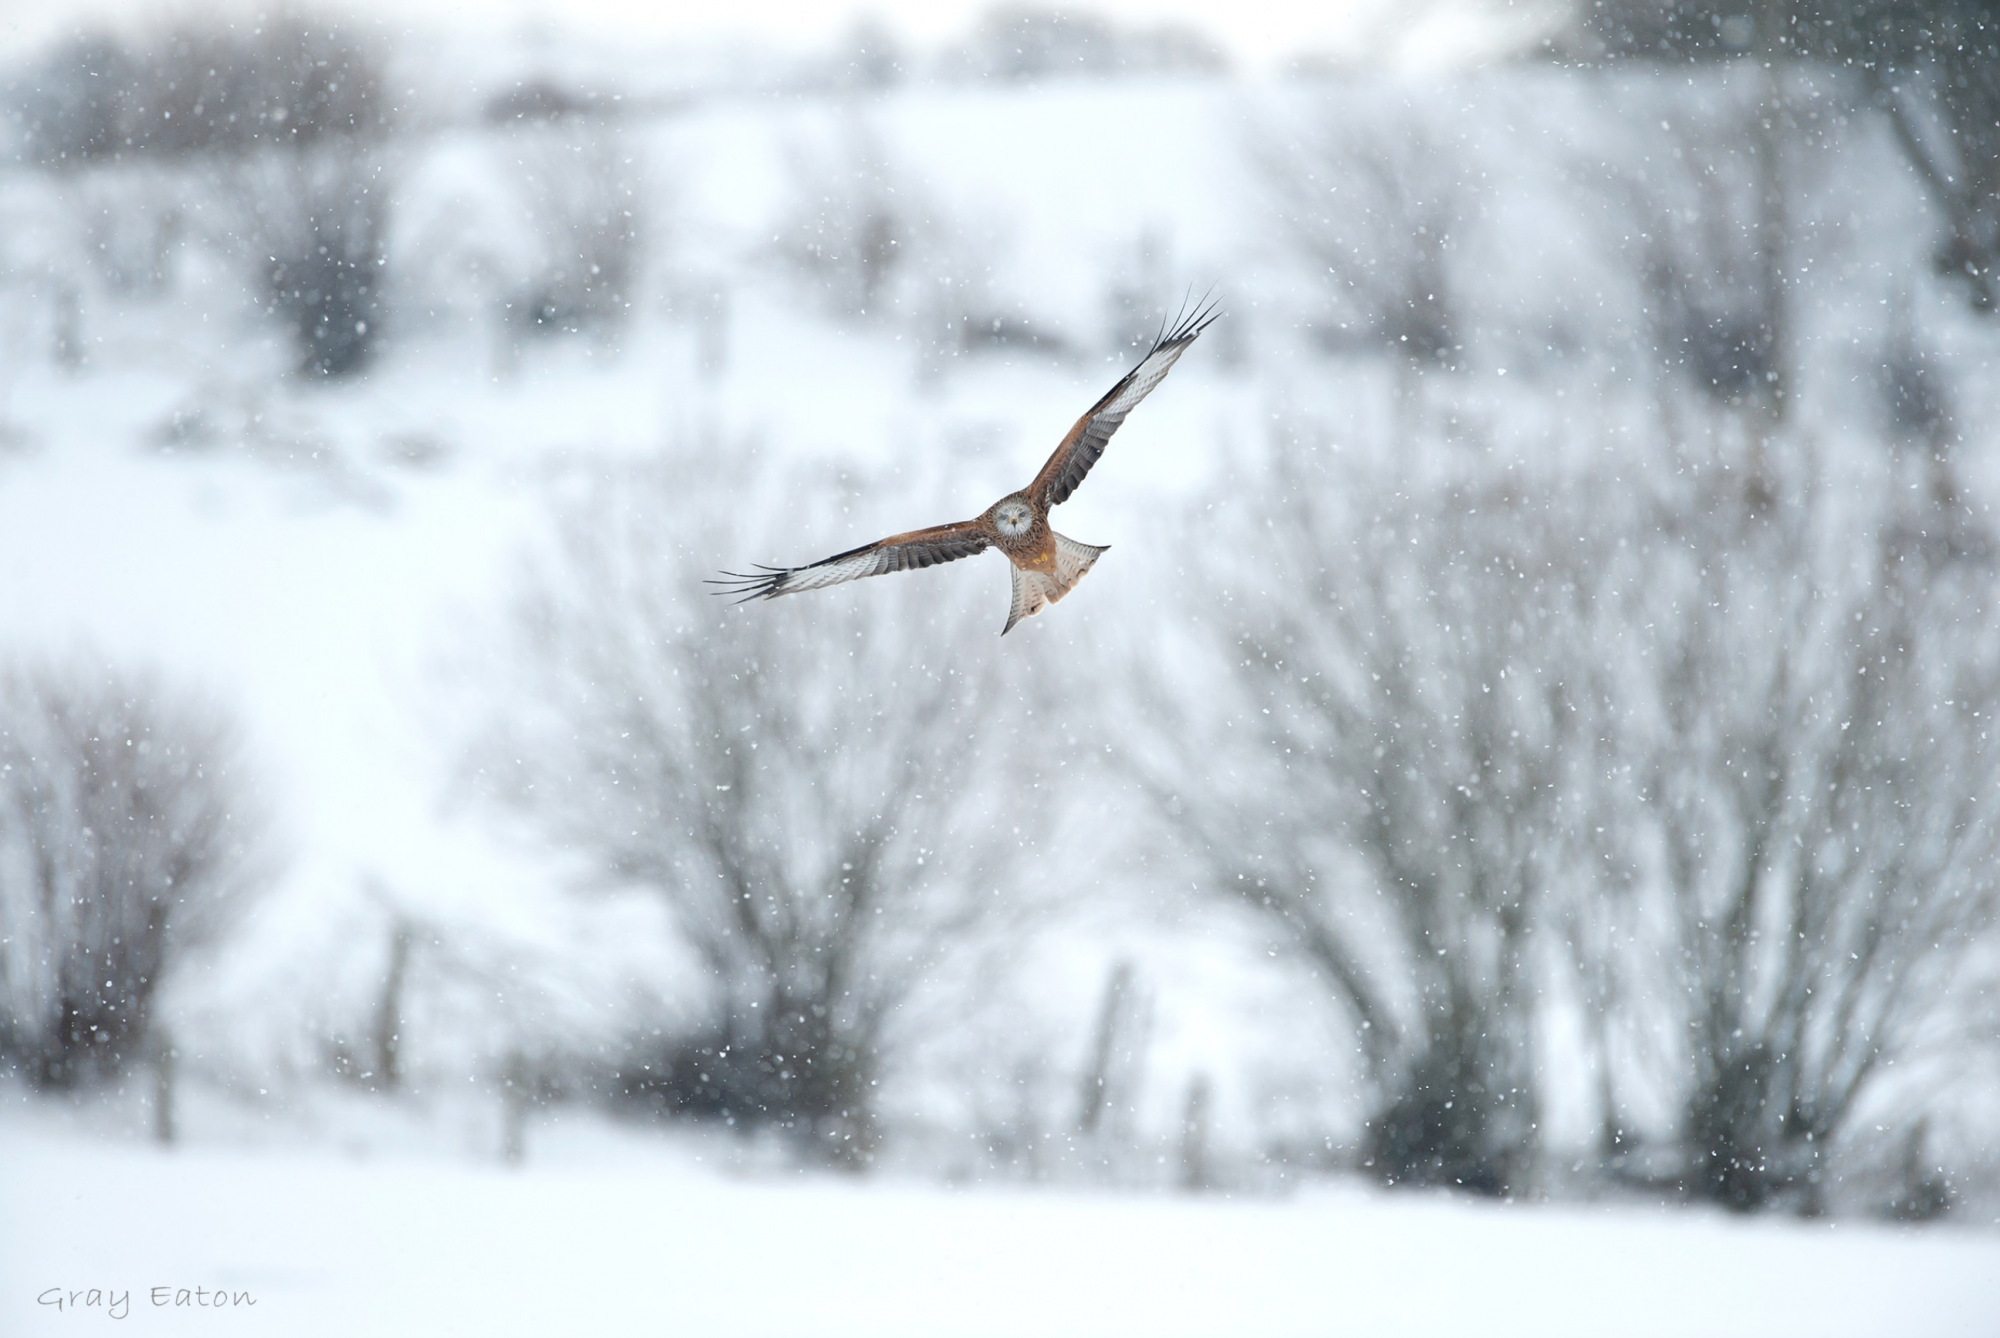 Kite, Bird of Prey, Wales, Snow, Landscape, countryside, Gray Eaton Photography, Cheshire